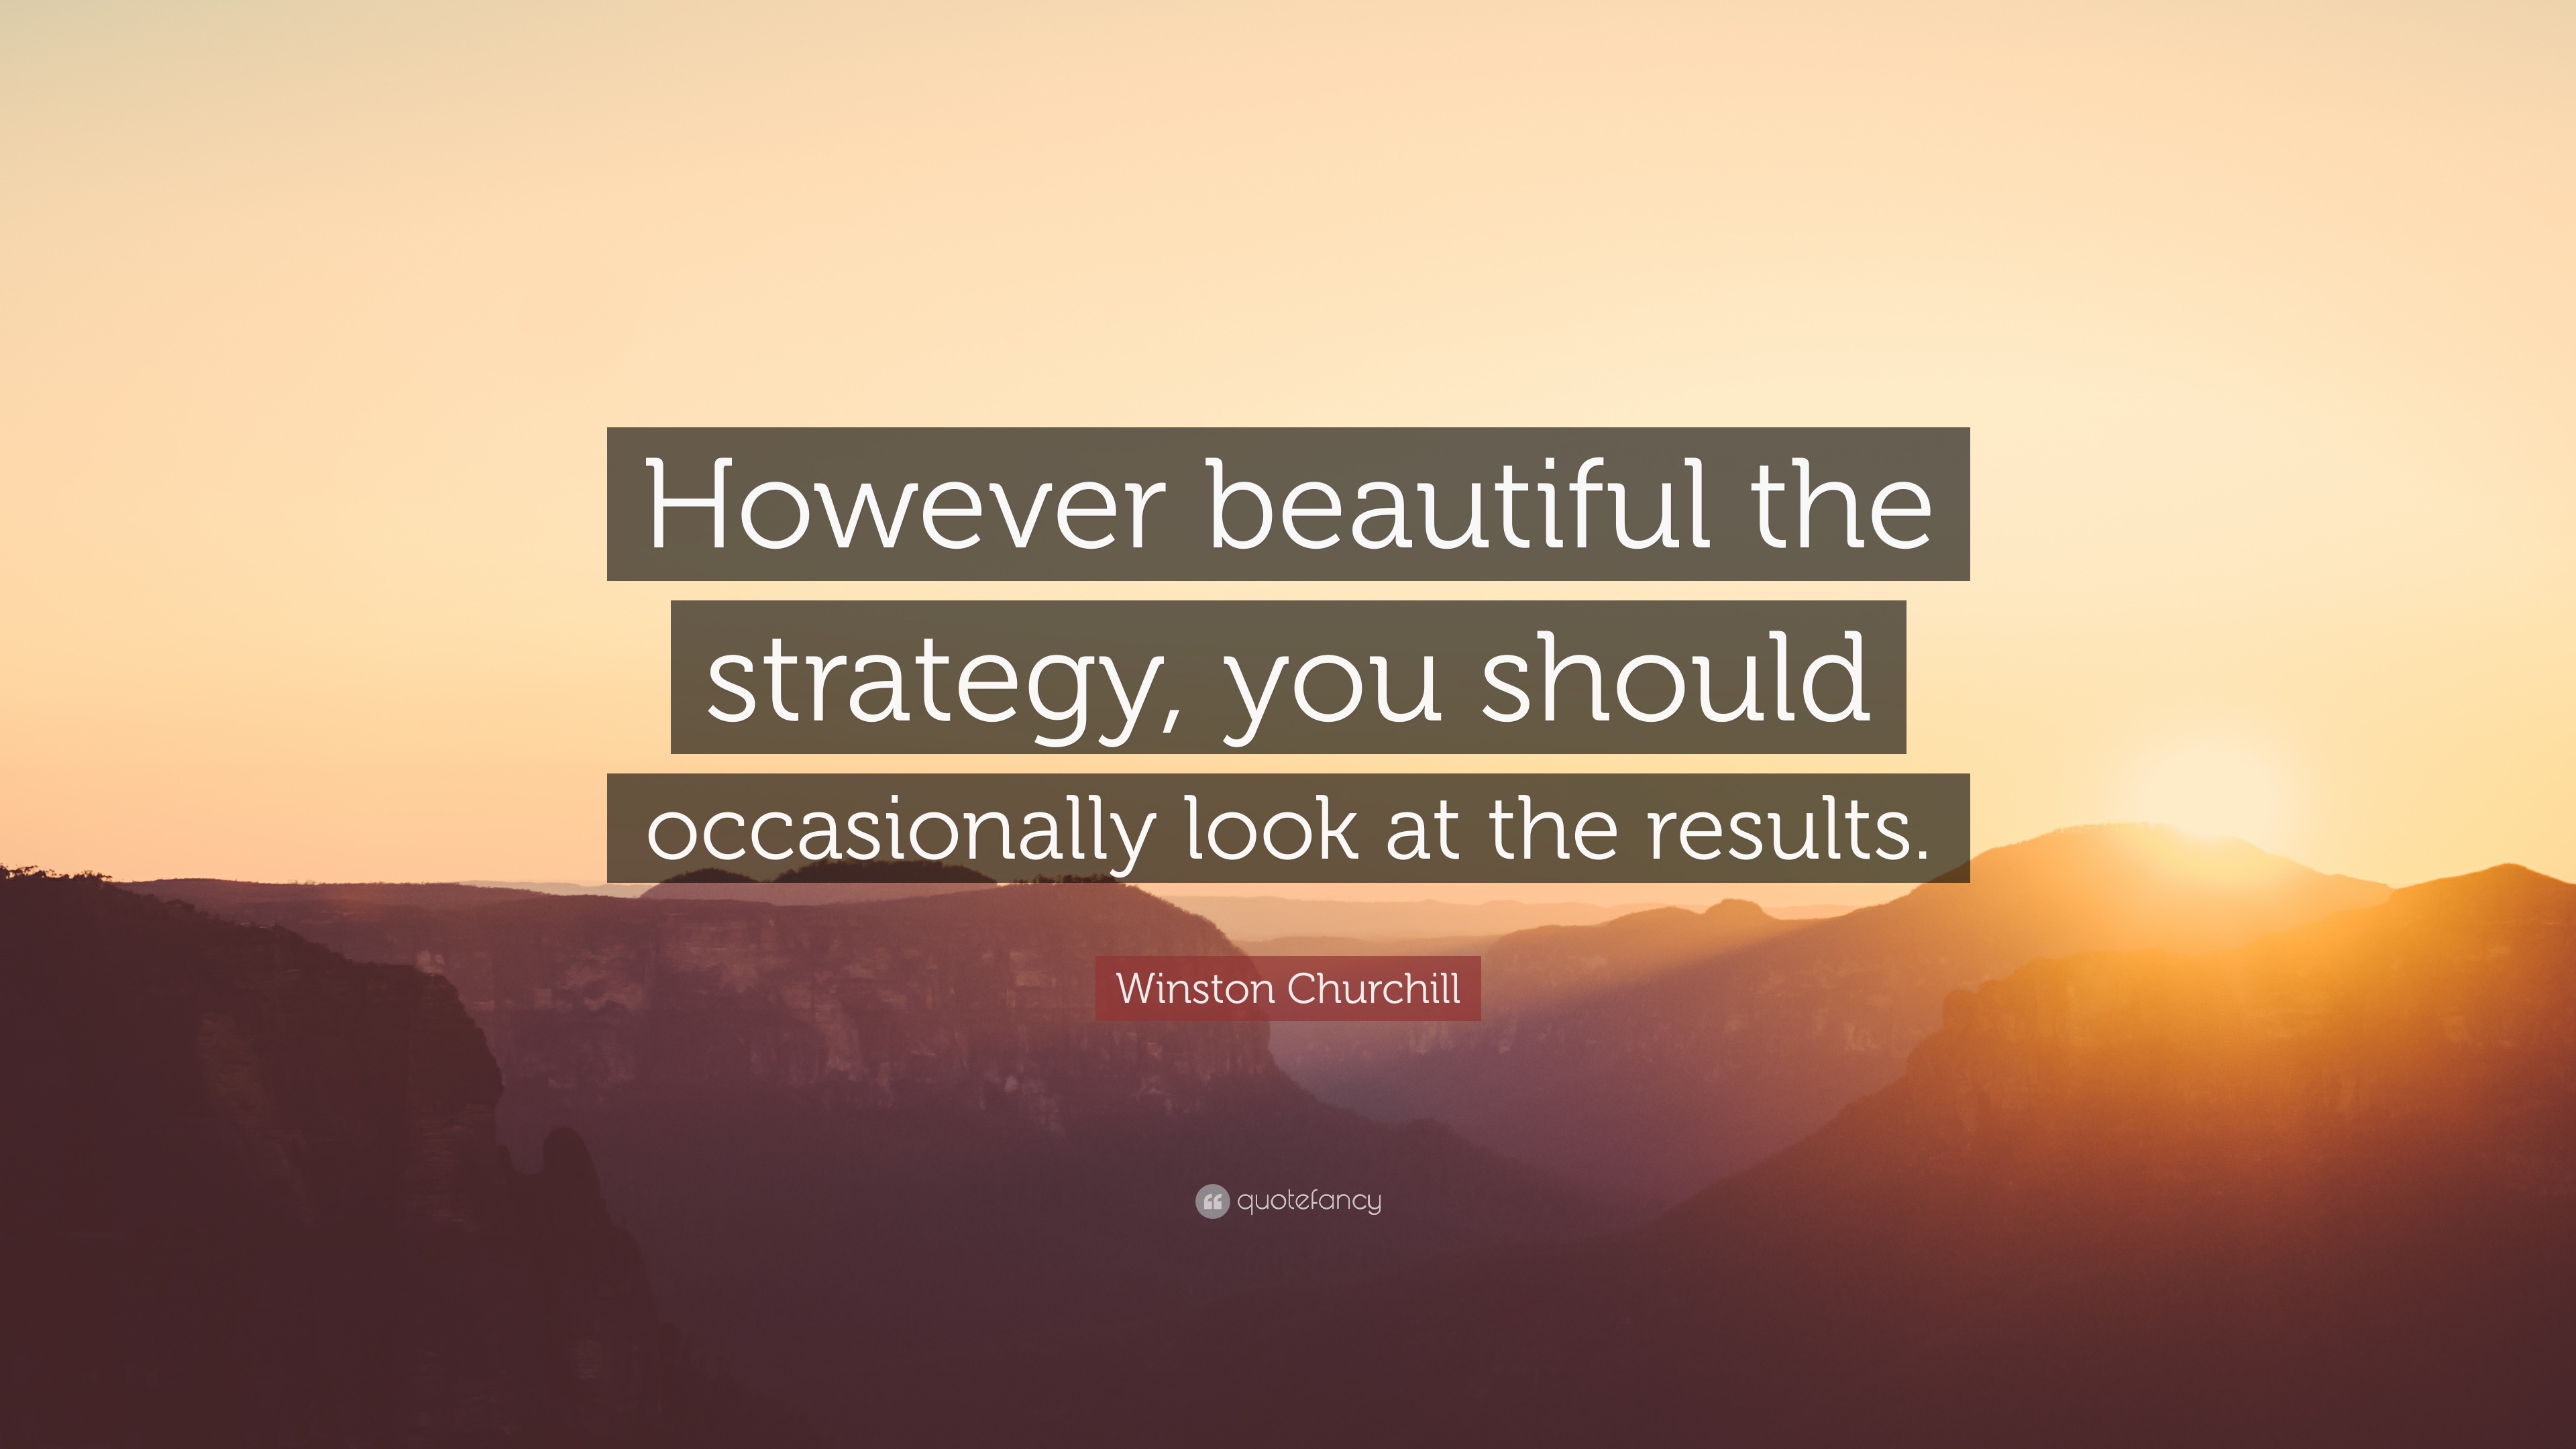 Winston Churchill Quote: “However beautiful the strategy, you should